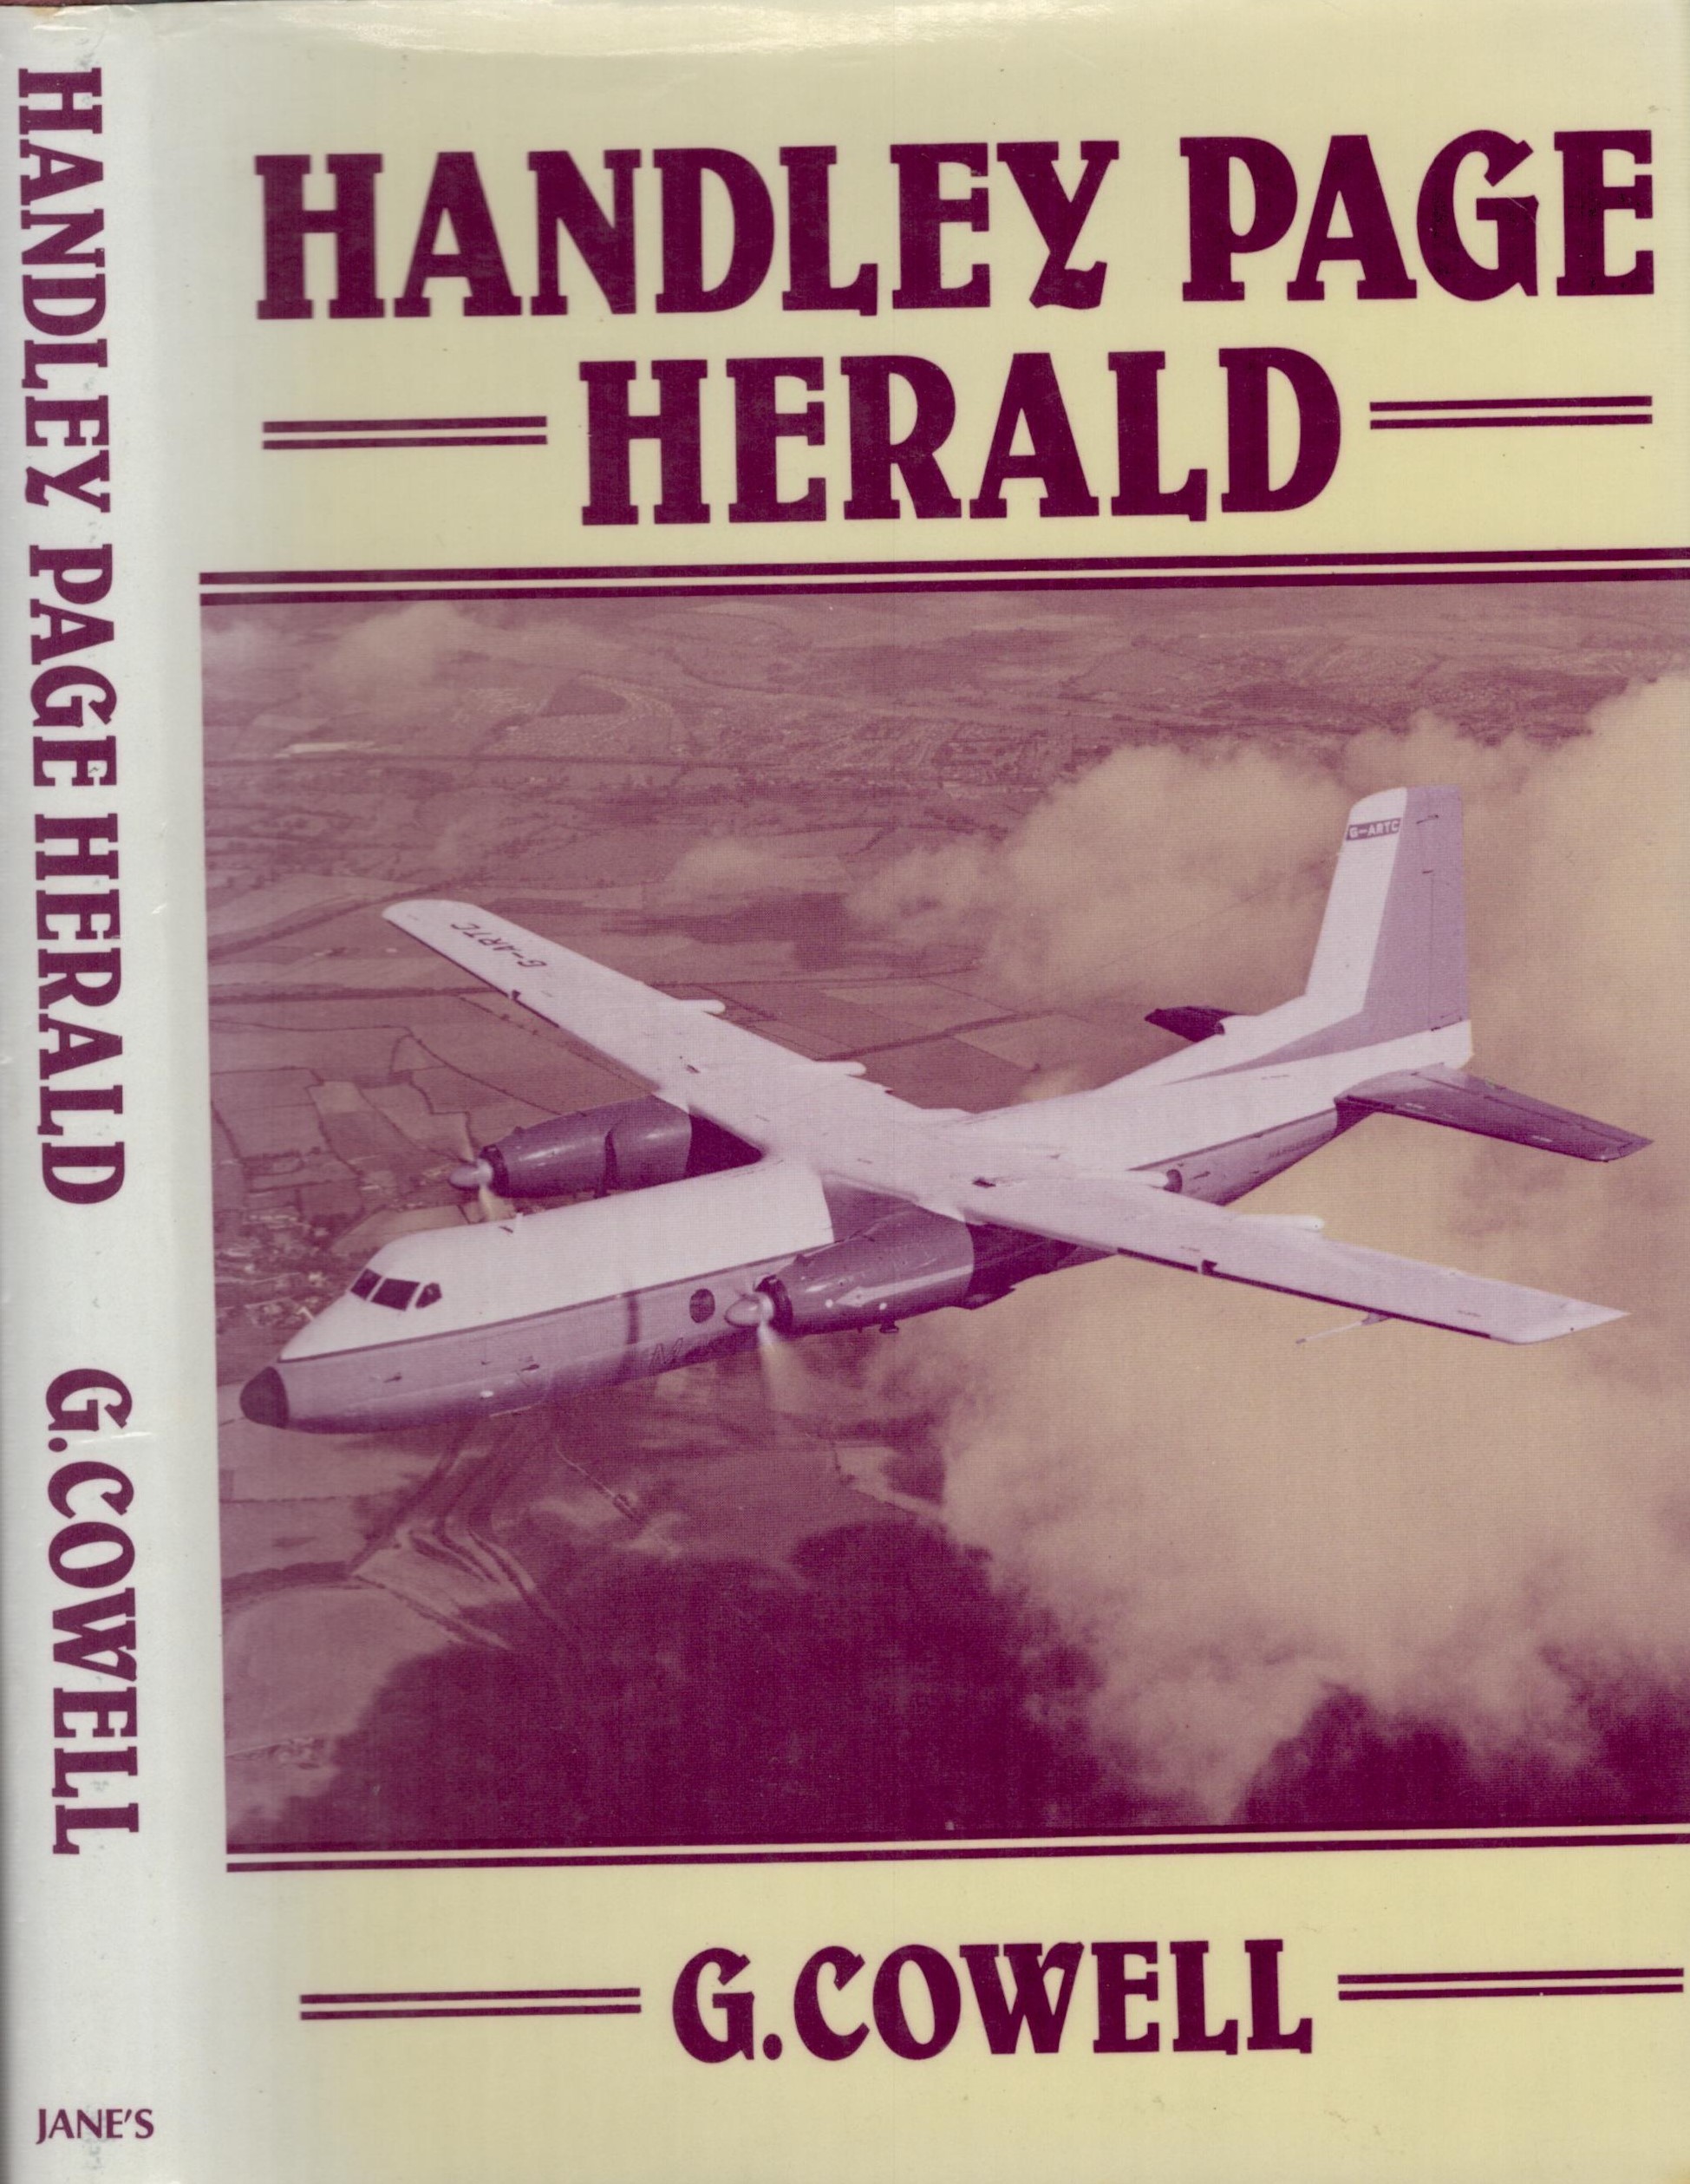 Handley Page Herald 1st Edition Hardback Book by G Cowell. Published in 1980. Showing Early Signs of